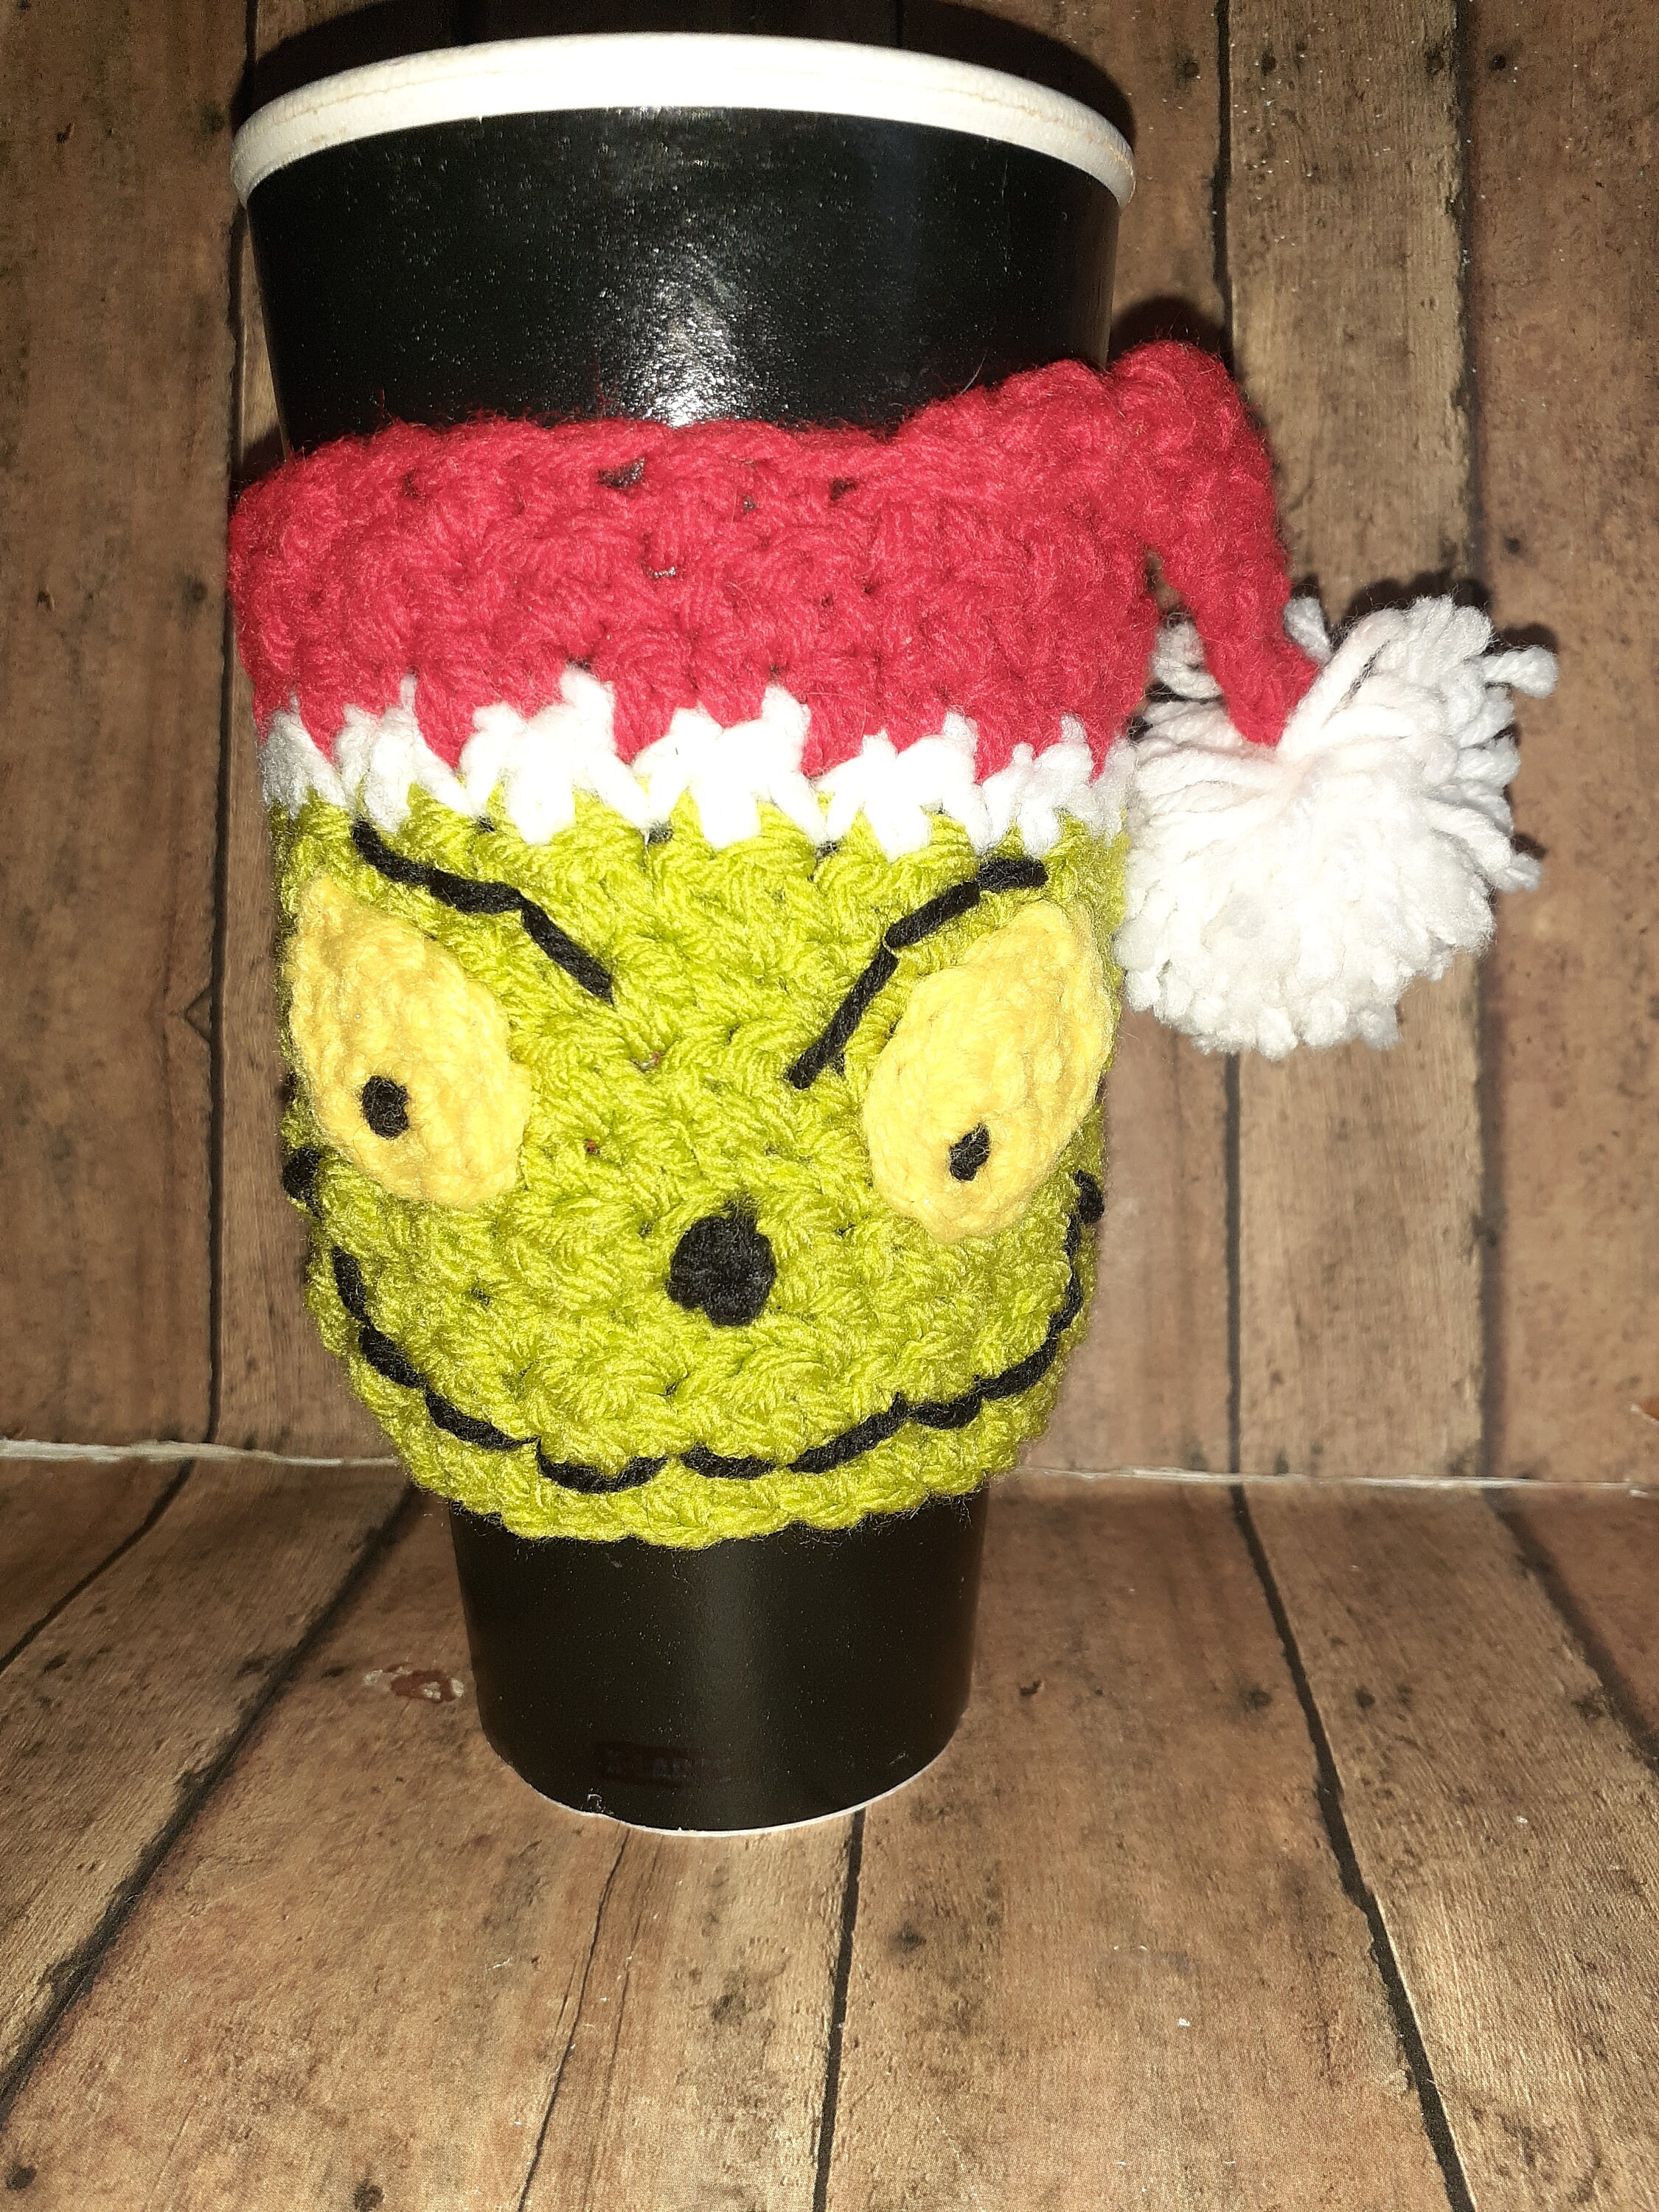 Grinch Cup Cozy, Christmas Cup Sleeve, Grinch Cozy, Iced Coffee Kozy,  Fabric Koozie, Insulated Christmas Cozy, Beverage Cover, Drink Cuff 